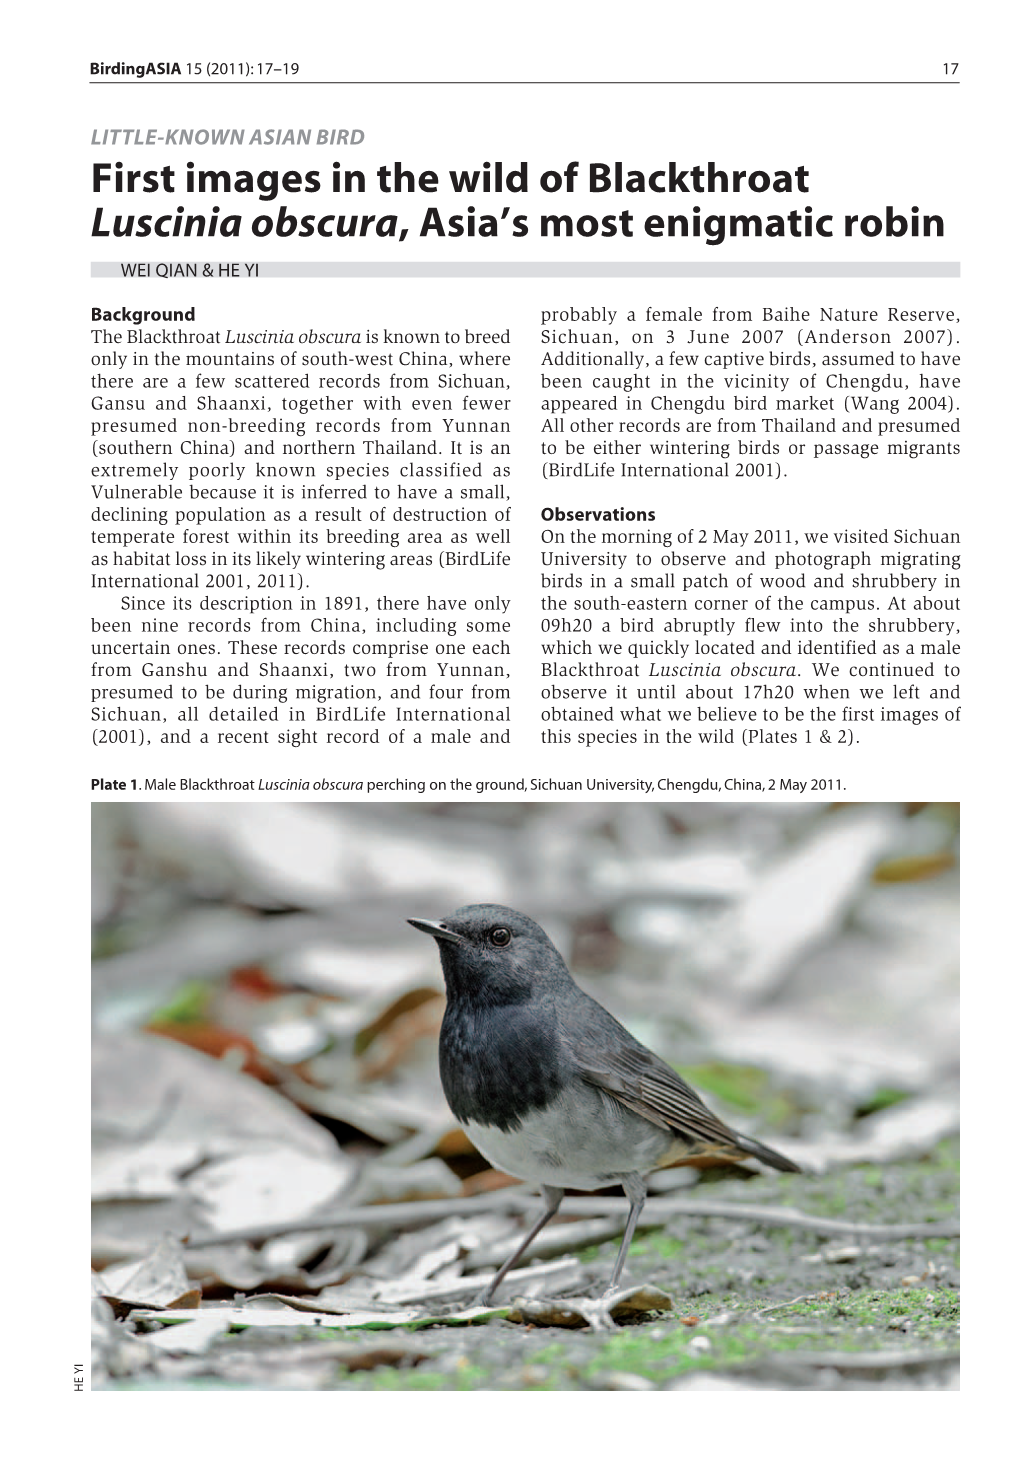 First Images in the Wild of Blackthroat Luscinia Obscura, Asia's Most